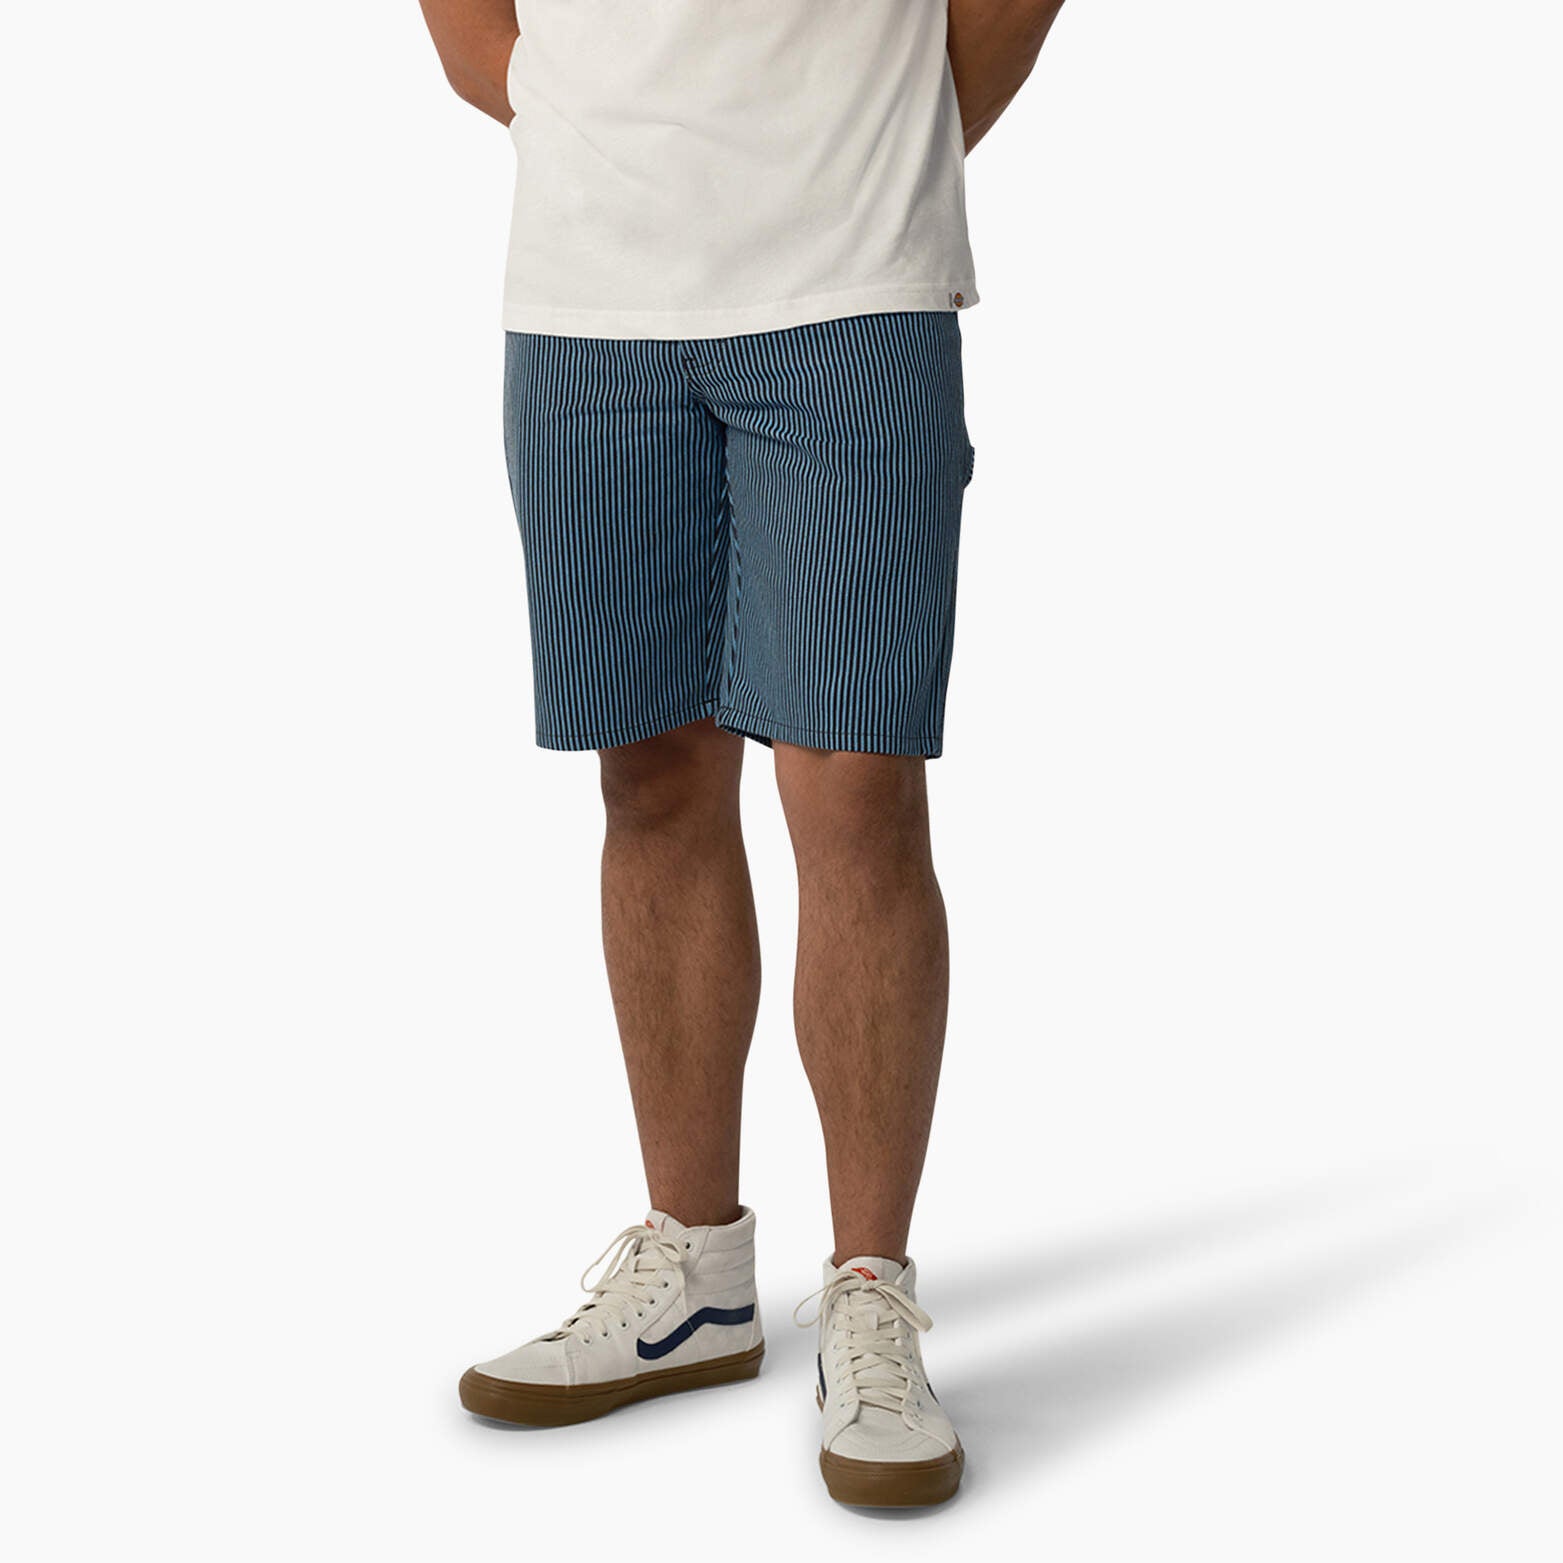 Dickies Men's Hickory Stripe Shorts (Azure or Military) $15.30 + Free Shipping